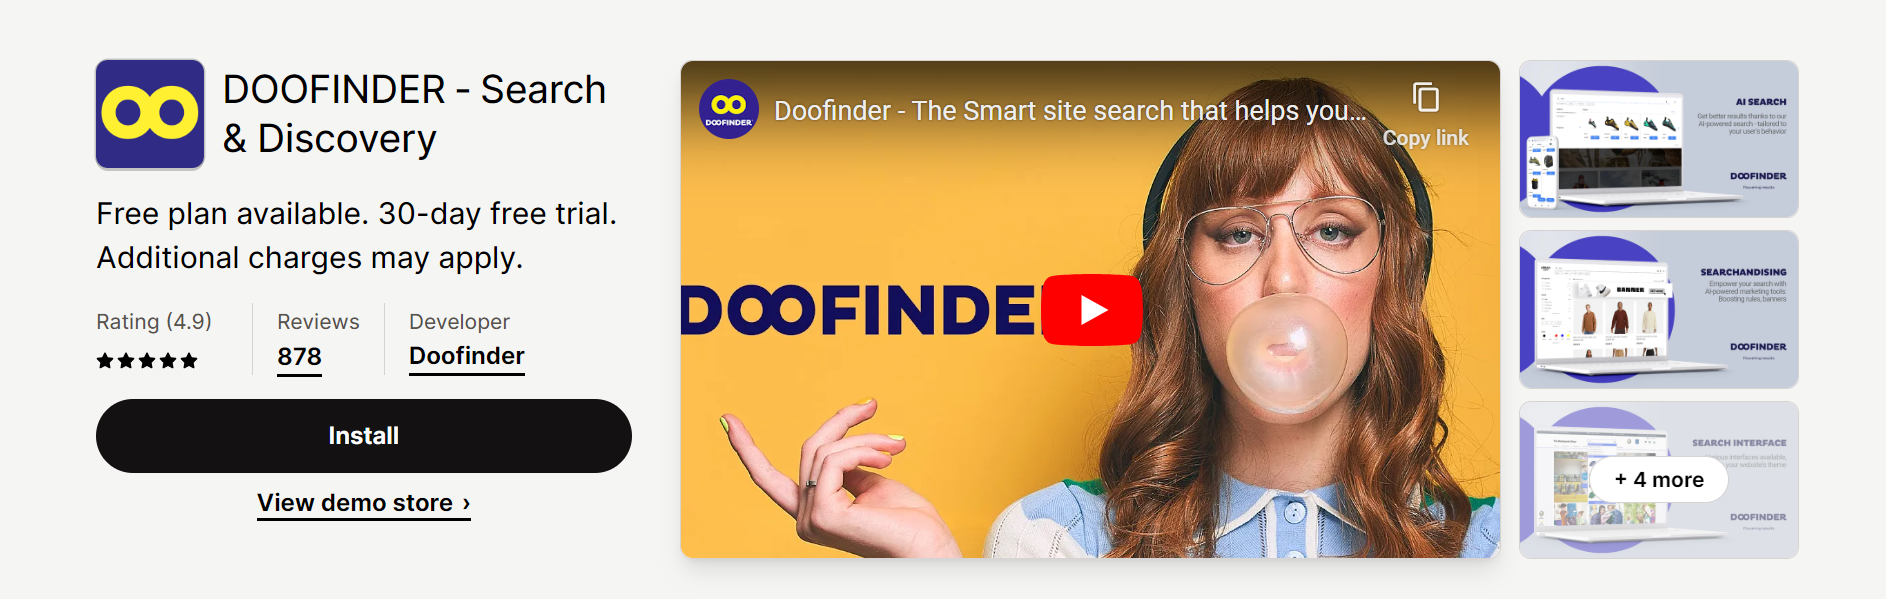 DOOFINDER ‑ Search & Discovery